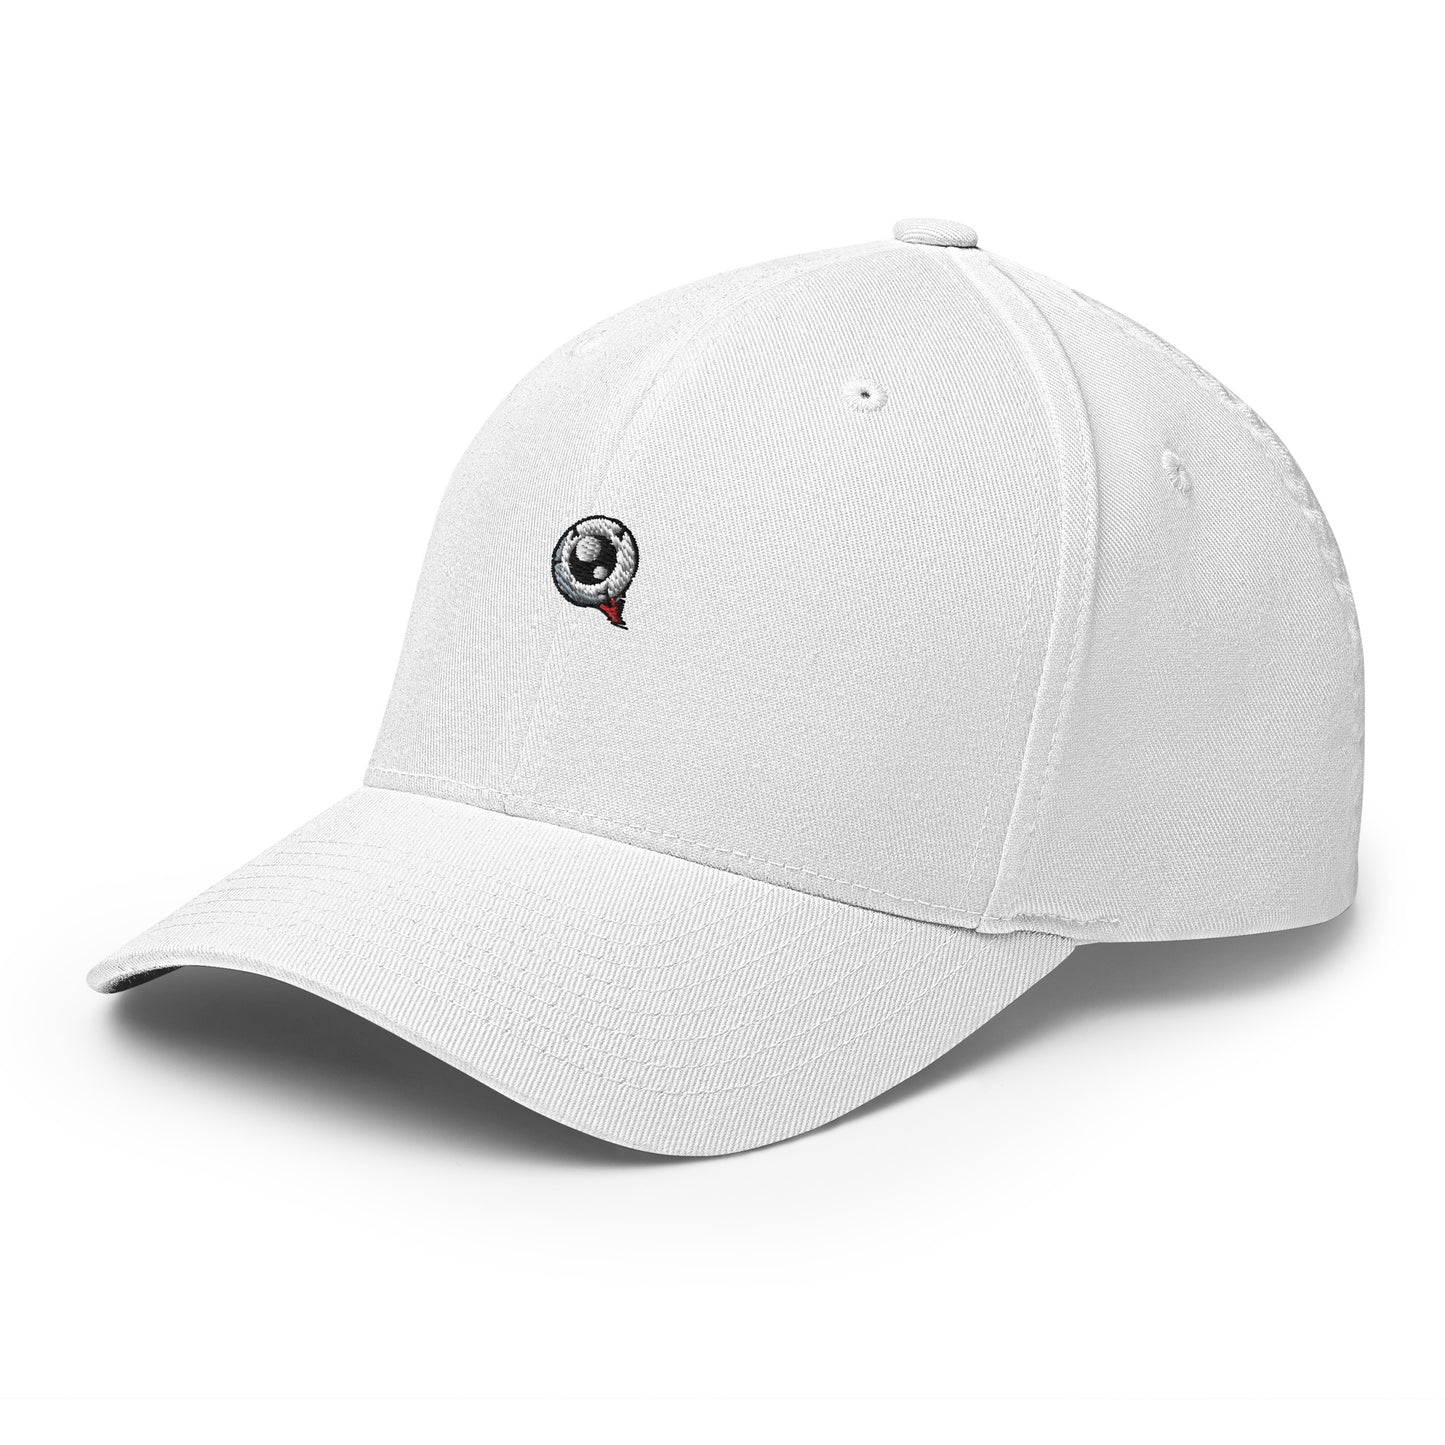 cap-from-the-front-with-eye-symbol